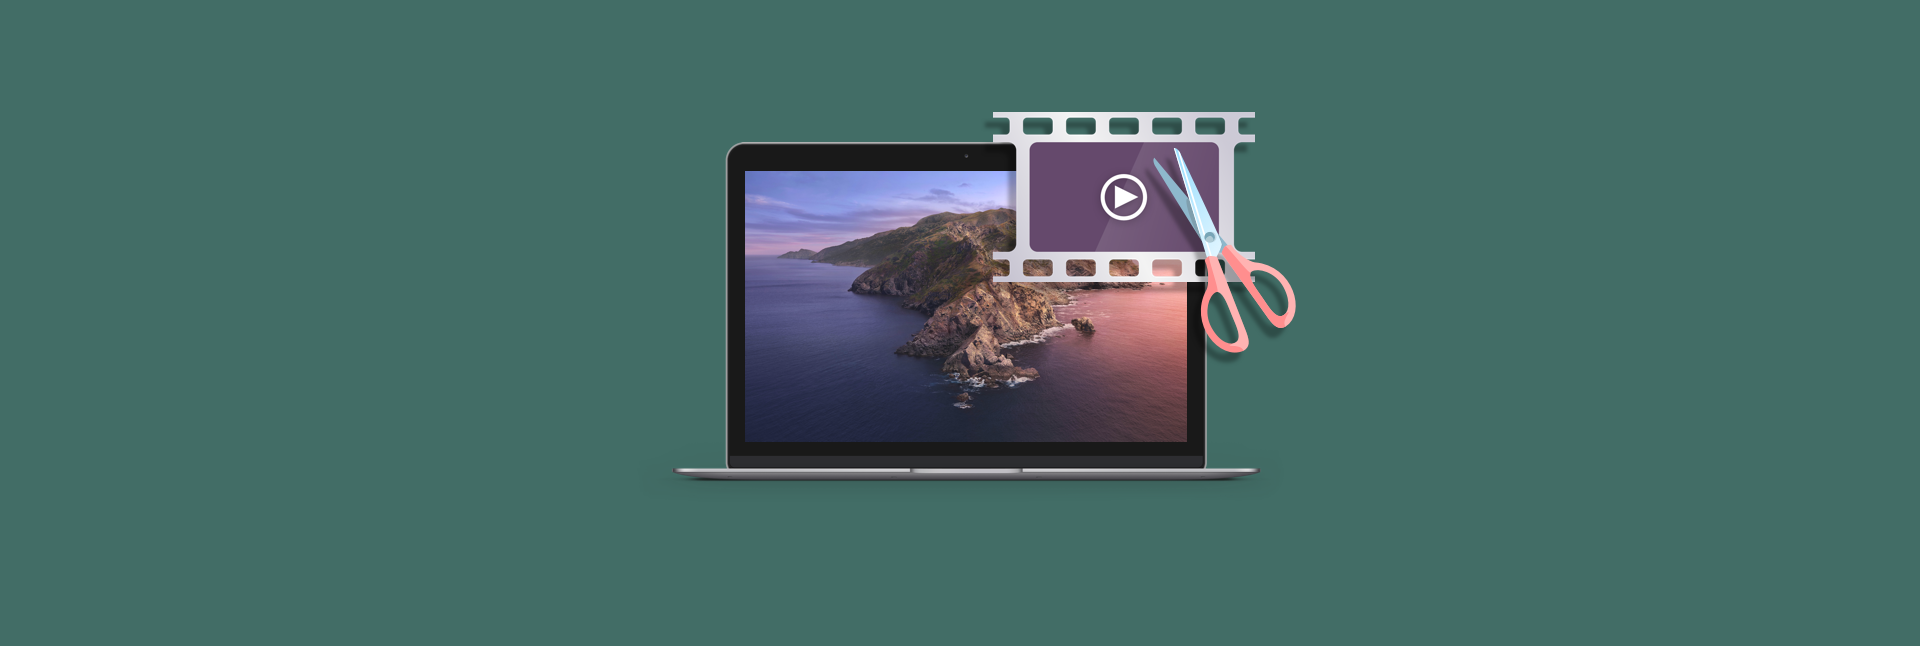 is mac a good laptop for photo and video editing